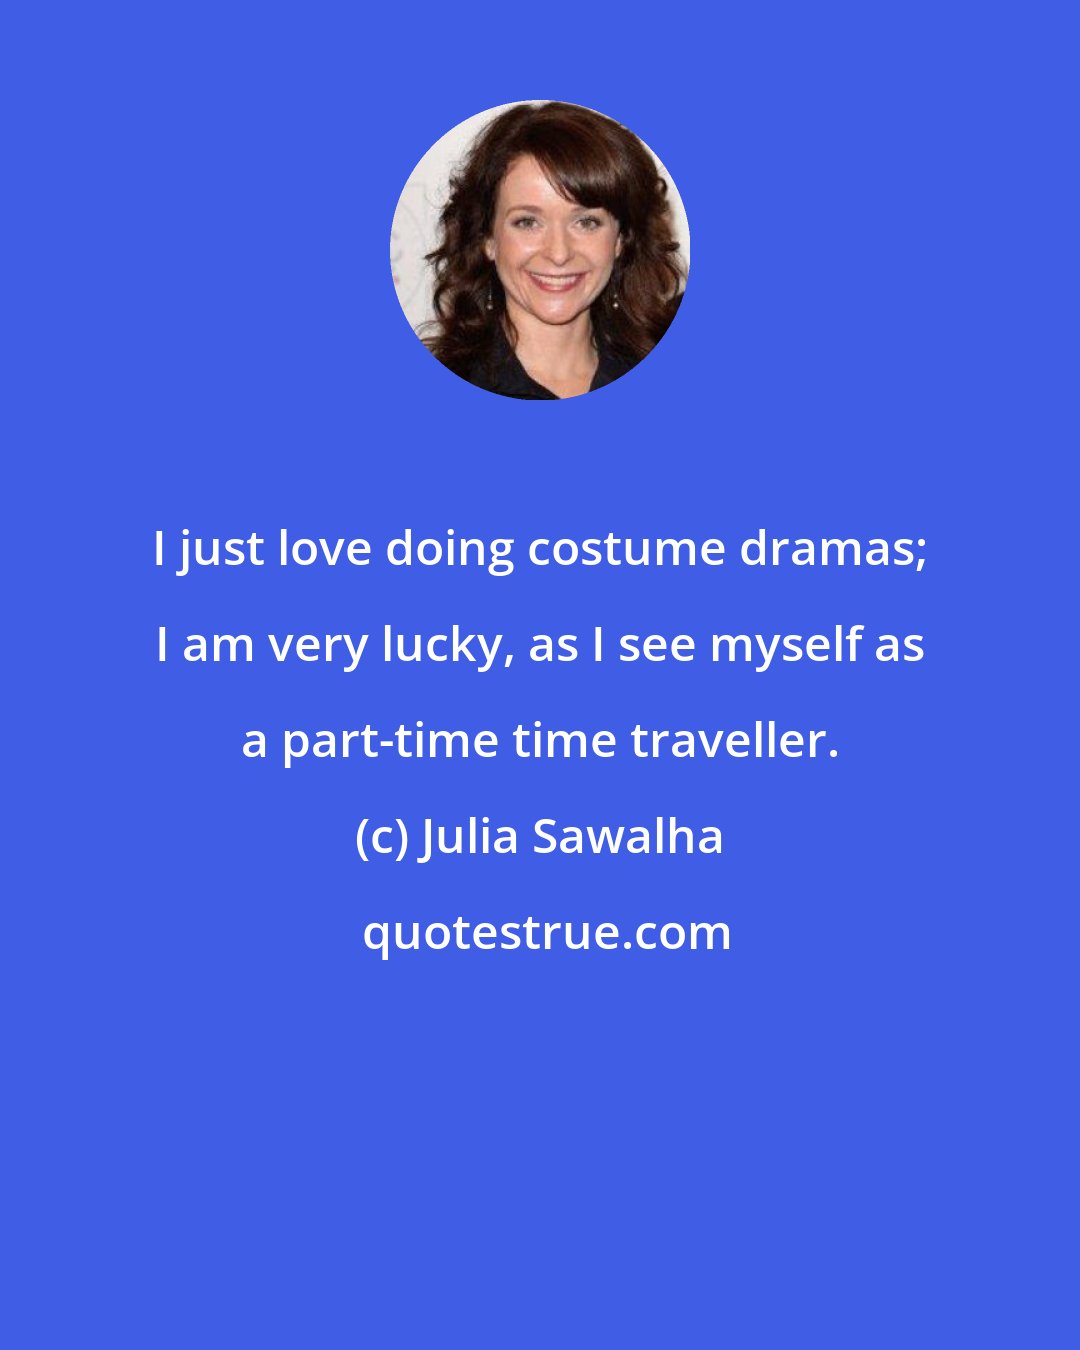 Julia Sawalha: I just love doing costume dramas; I am very lucky, as I see myself as a part-time time traveller.